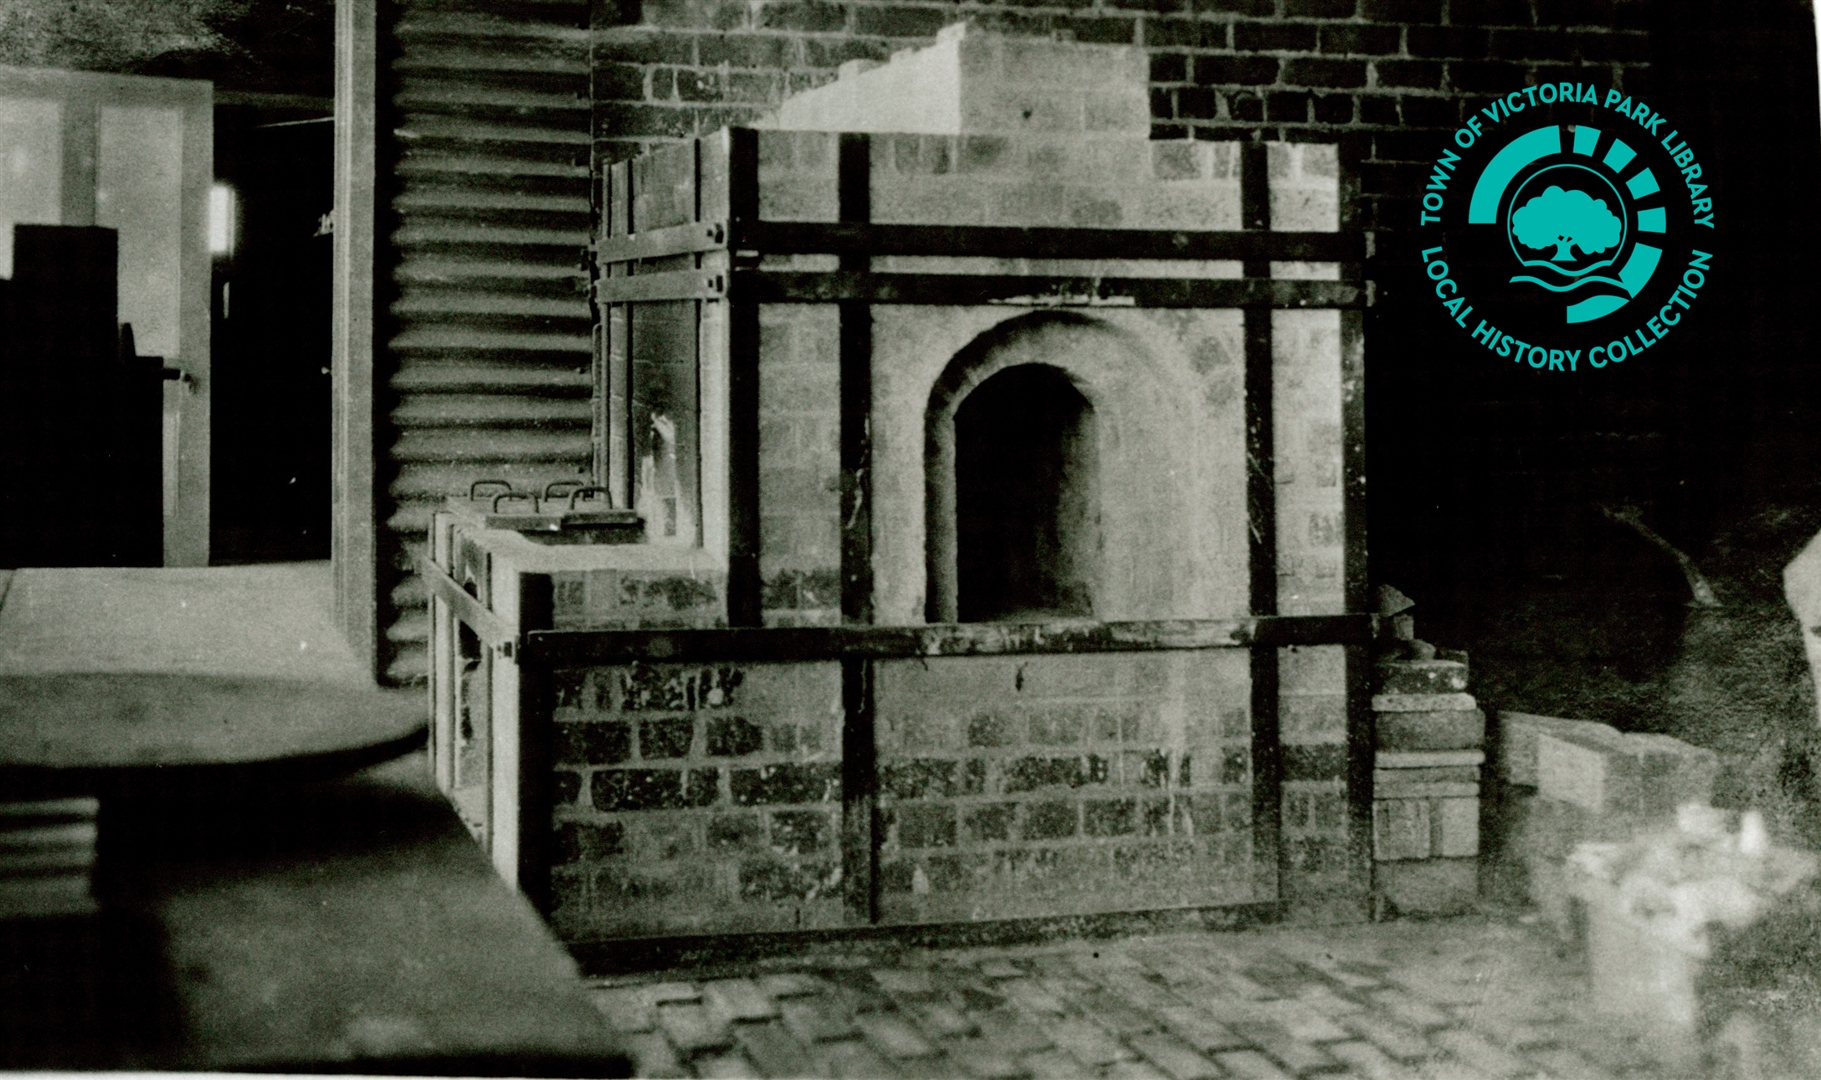 PH00024-02 (PH90018) Oven or kiln in unknown location and unknown date Image